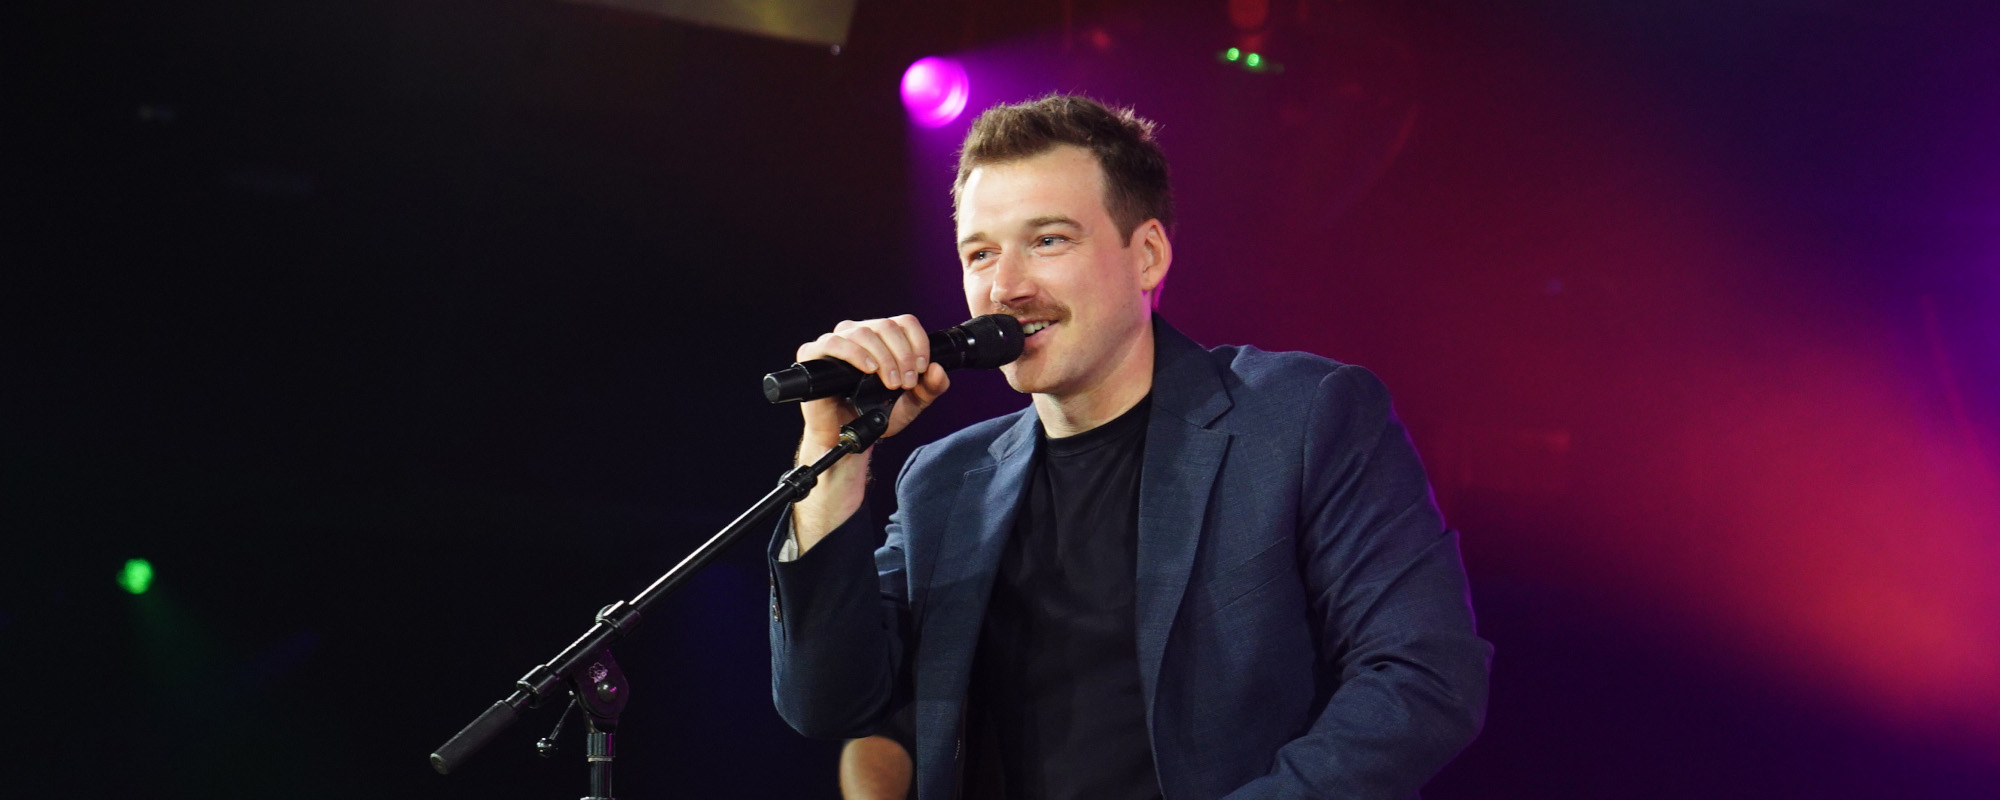 The Meaning Behind Morgan Wallen’s and Eric Church’s Hazy “Man Made a Bar”